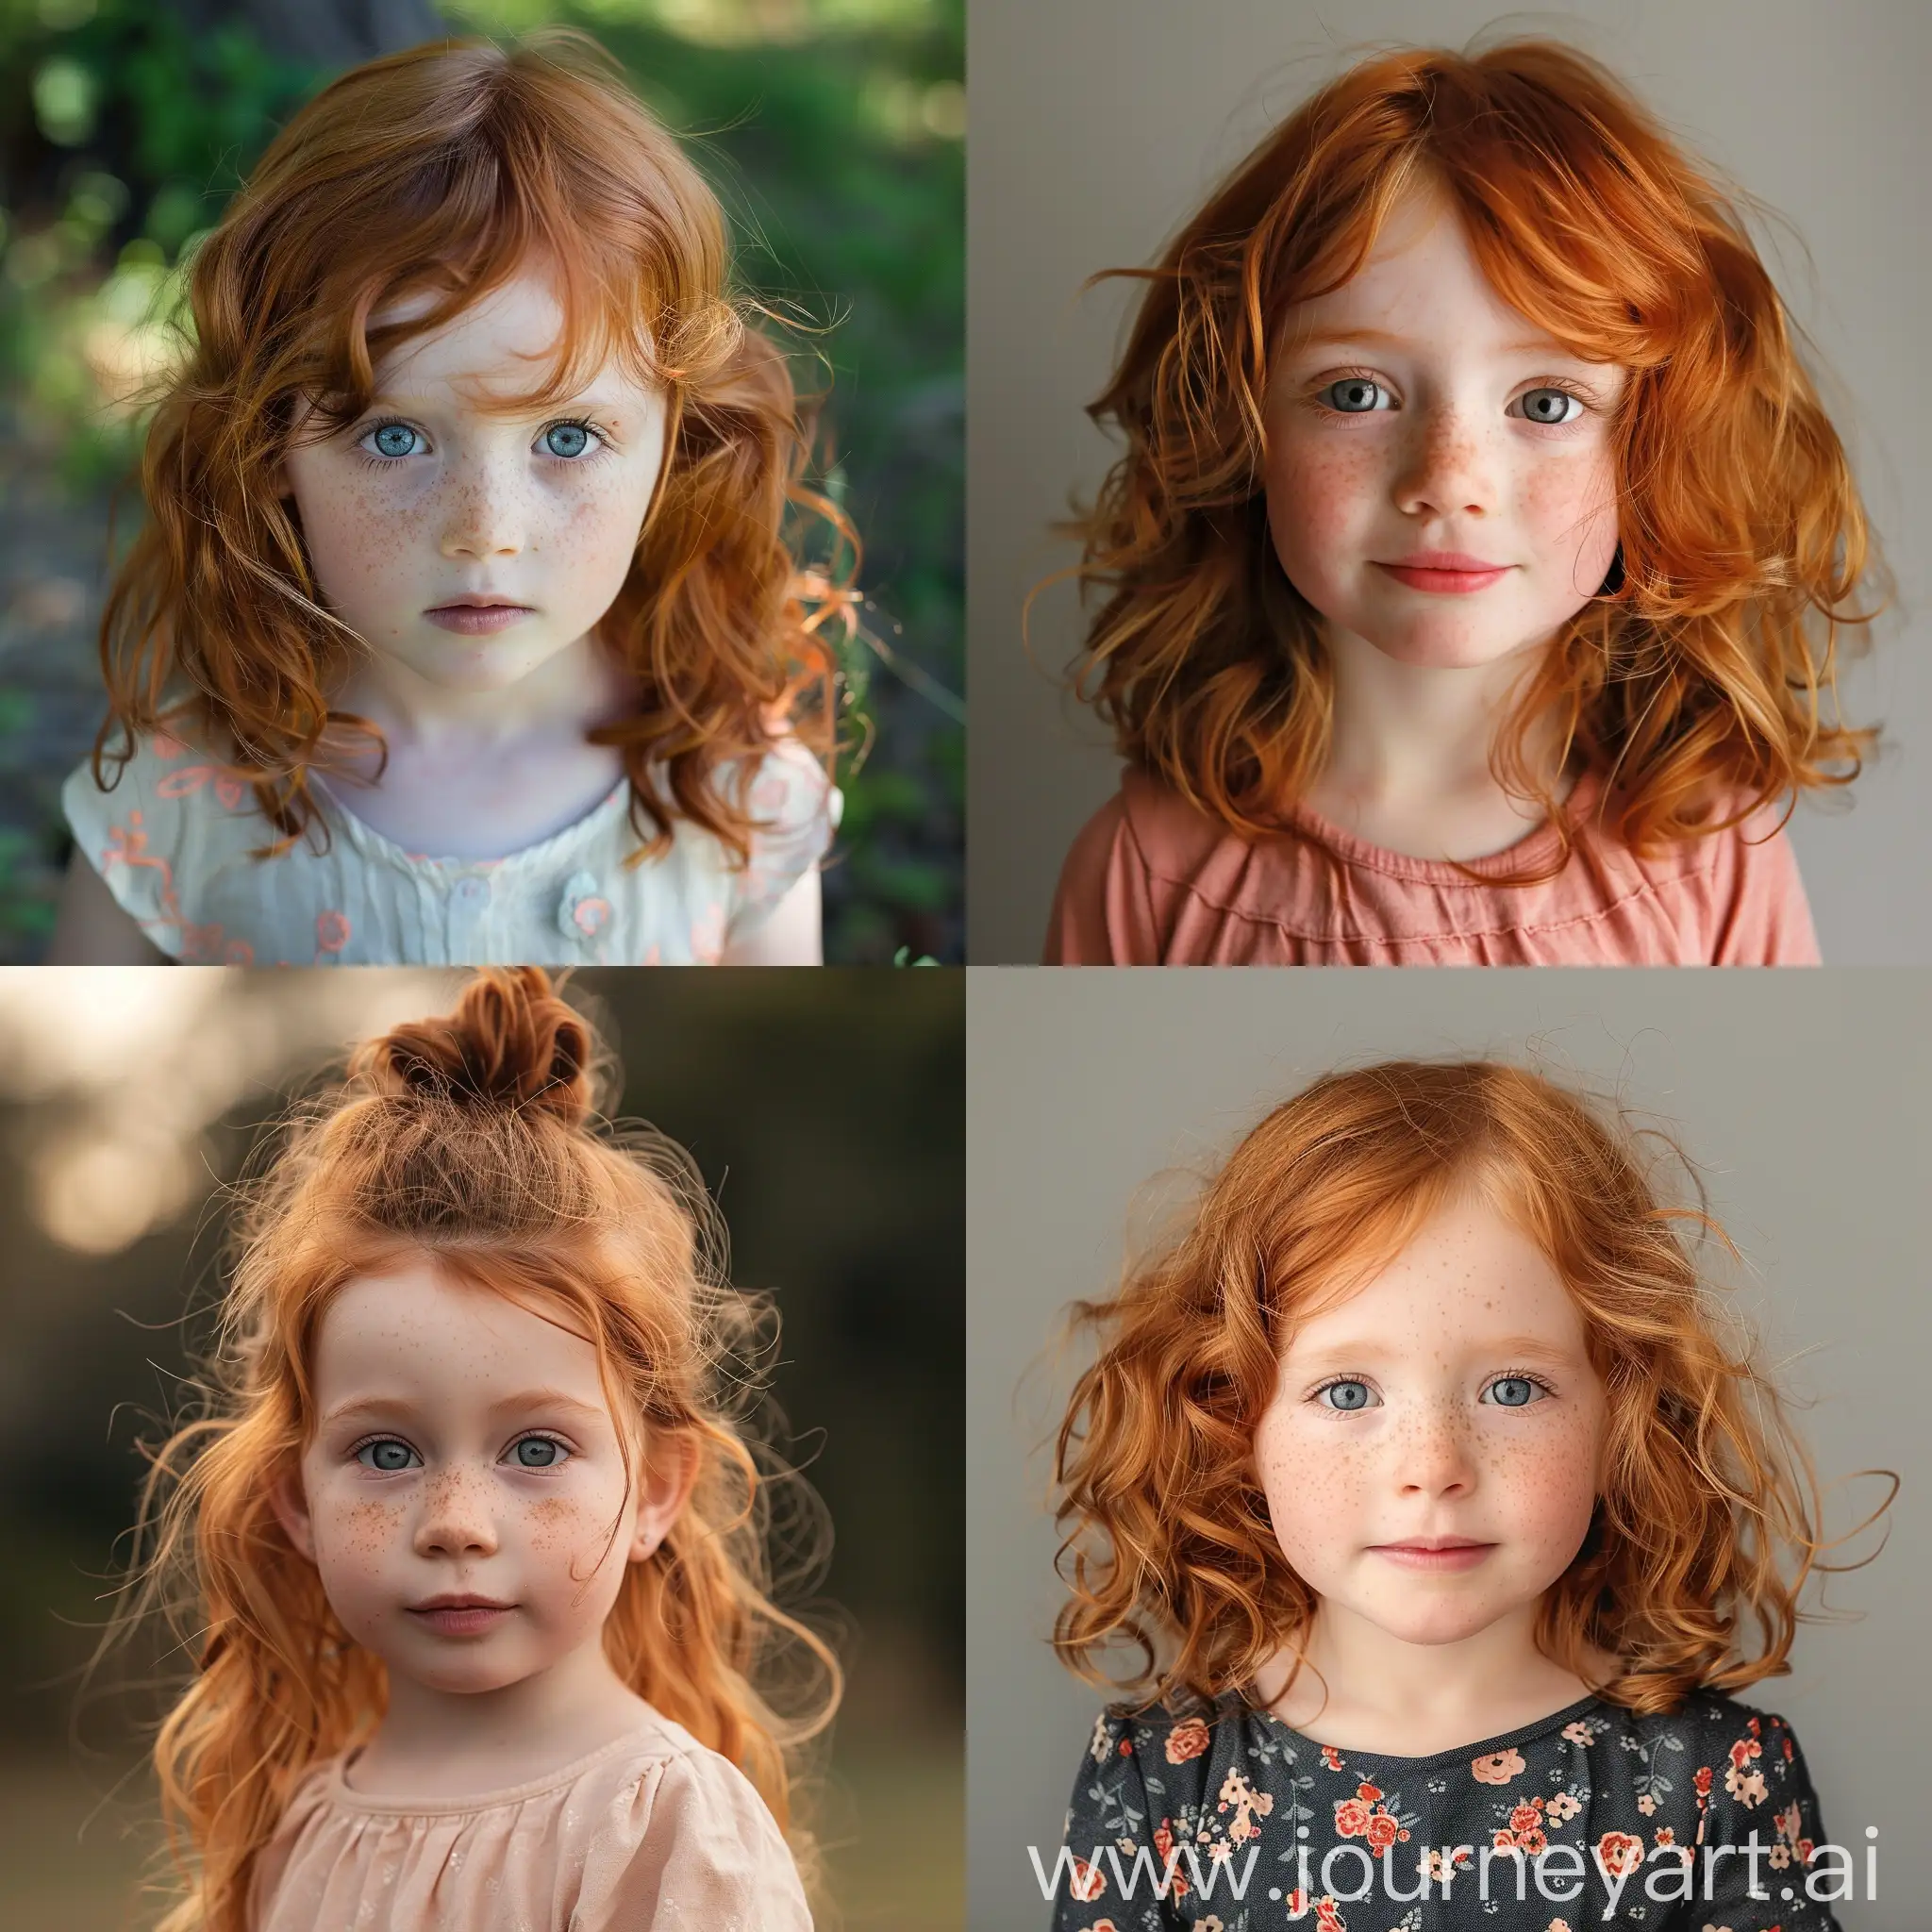 a small girl with red hair